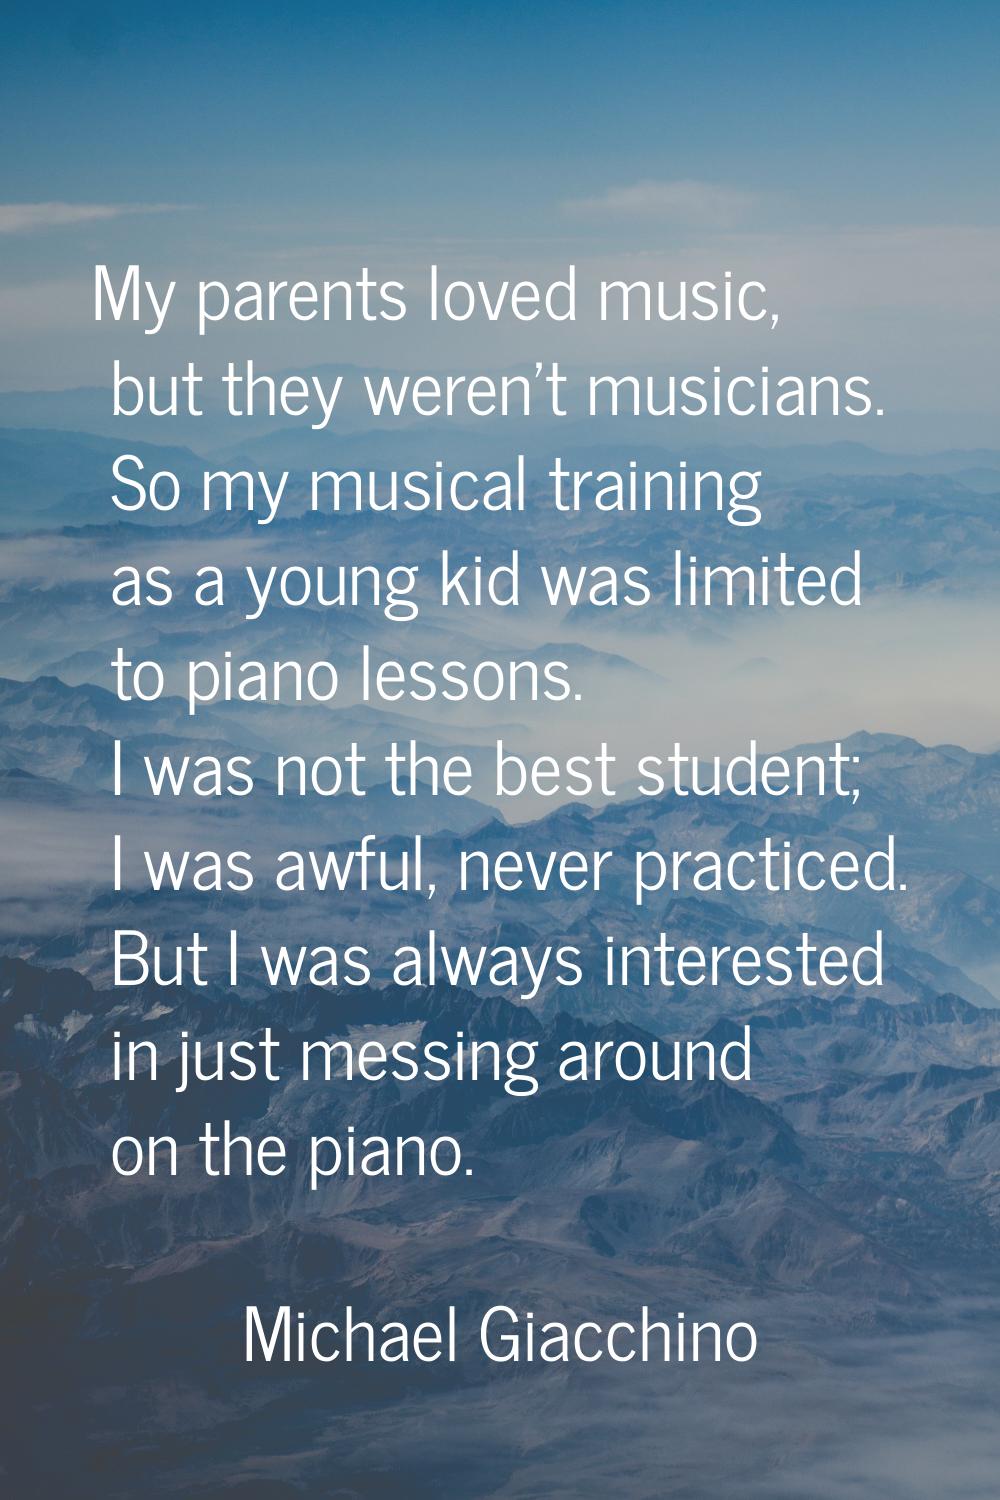 My parents loved music, but they weren't musicians. So my musical training as a young kid was limit